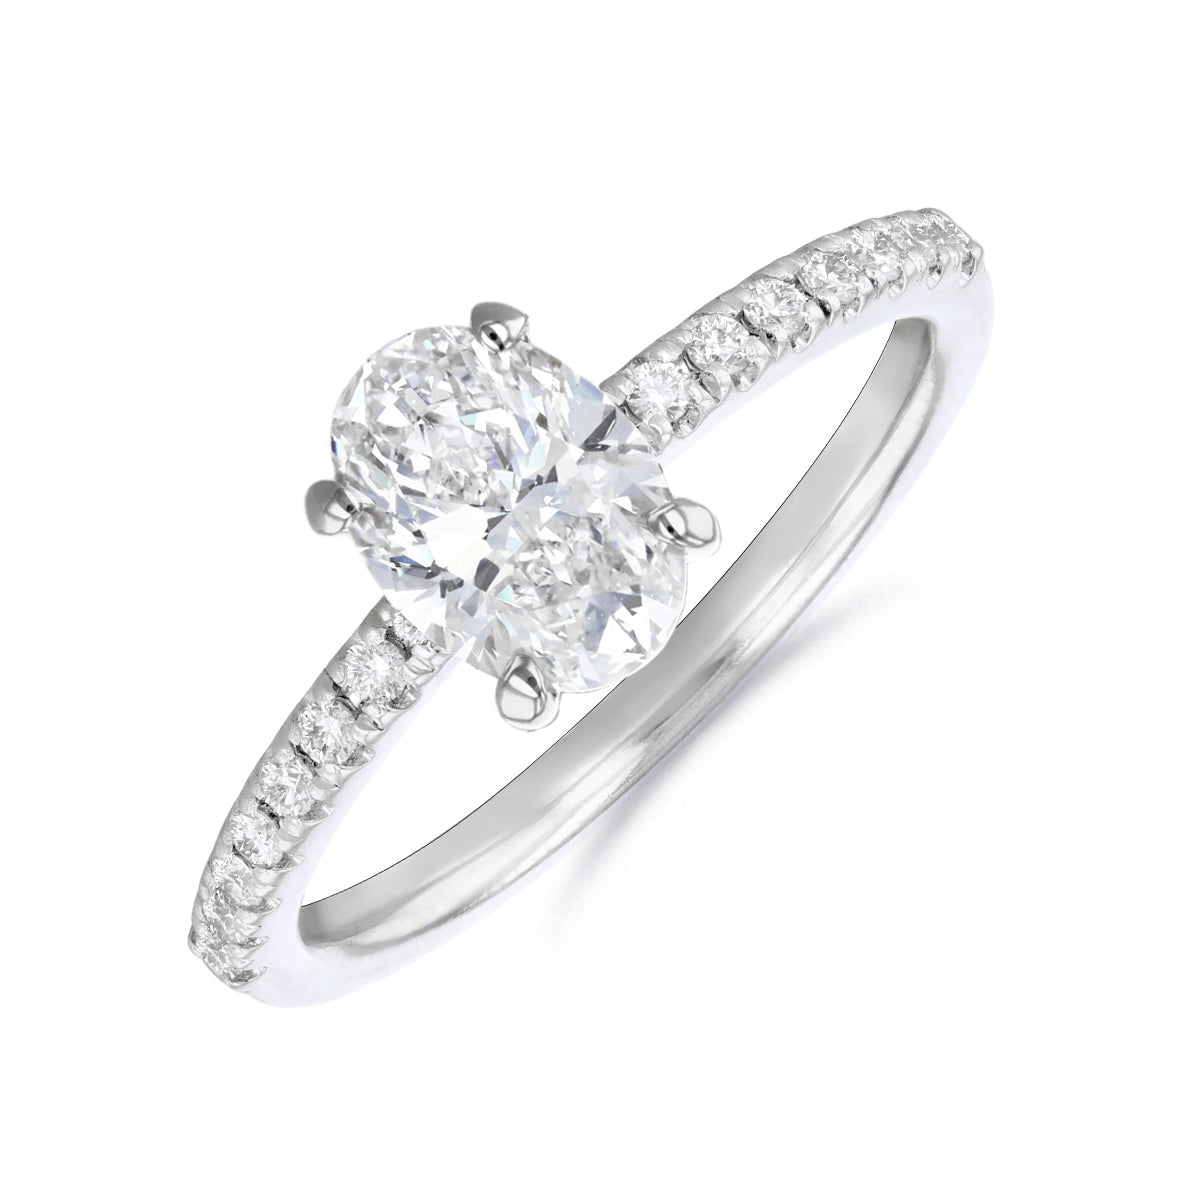 0.25ct Poppy Shoulder Set Oval Cut Diamond Solitaire Engagement Ring | 18ct Yellow Gold